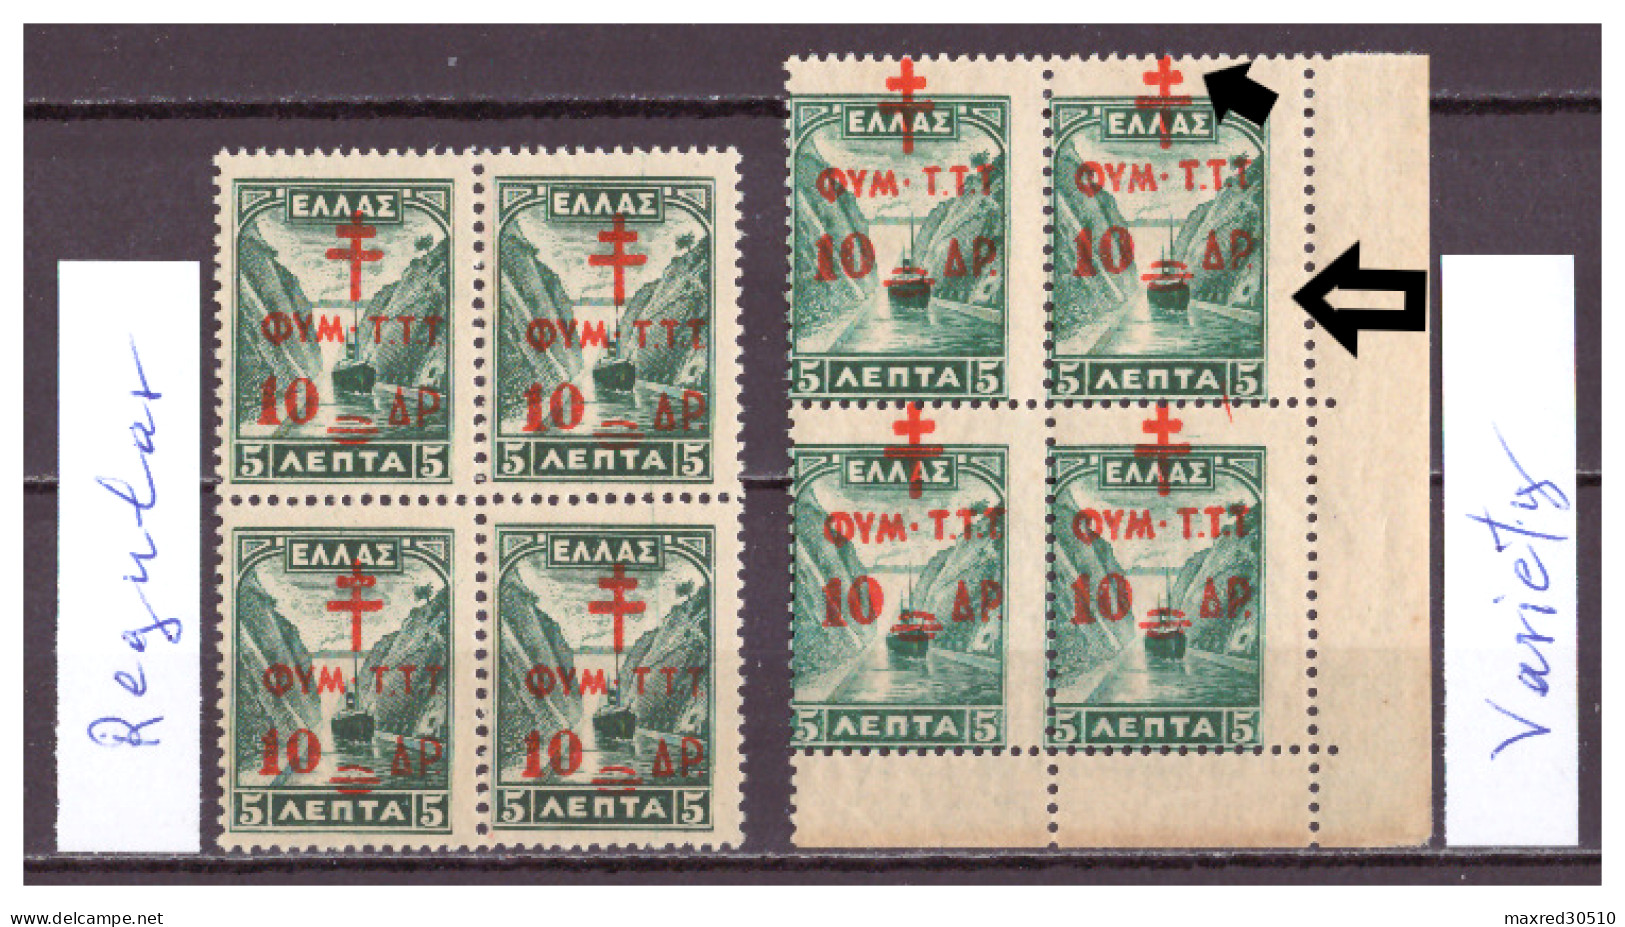 GREECE 1942/43 CHARITY 2 SAME BLOCKS OF 4X10DR./5L. OF "STAMPS OF 1927 LANDSCAPES WITH RED OVPT" WITH VARIETIES MNH - Varietà & Curiosità